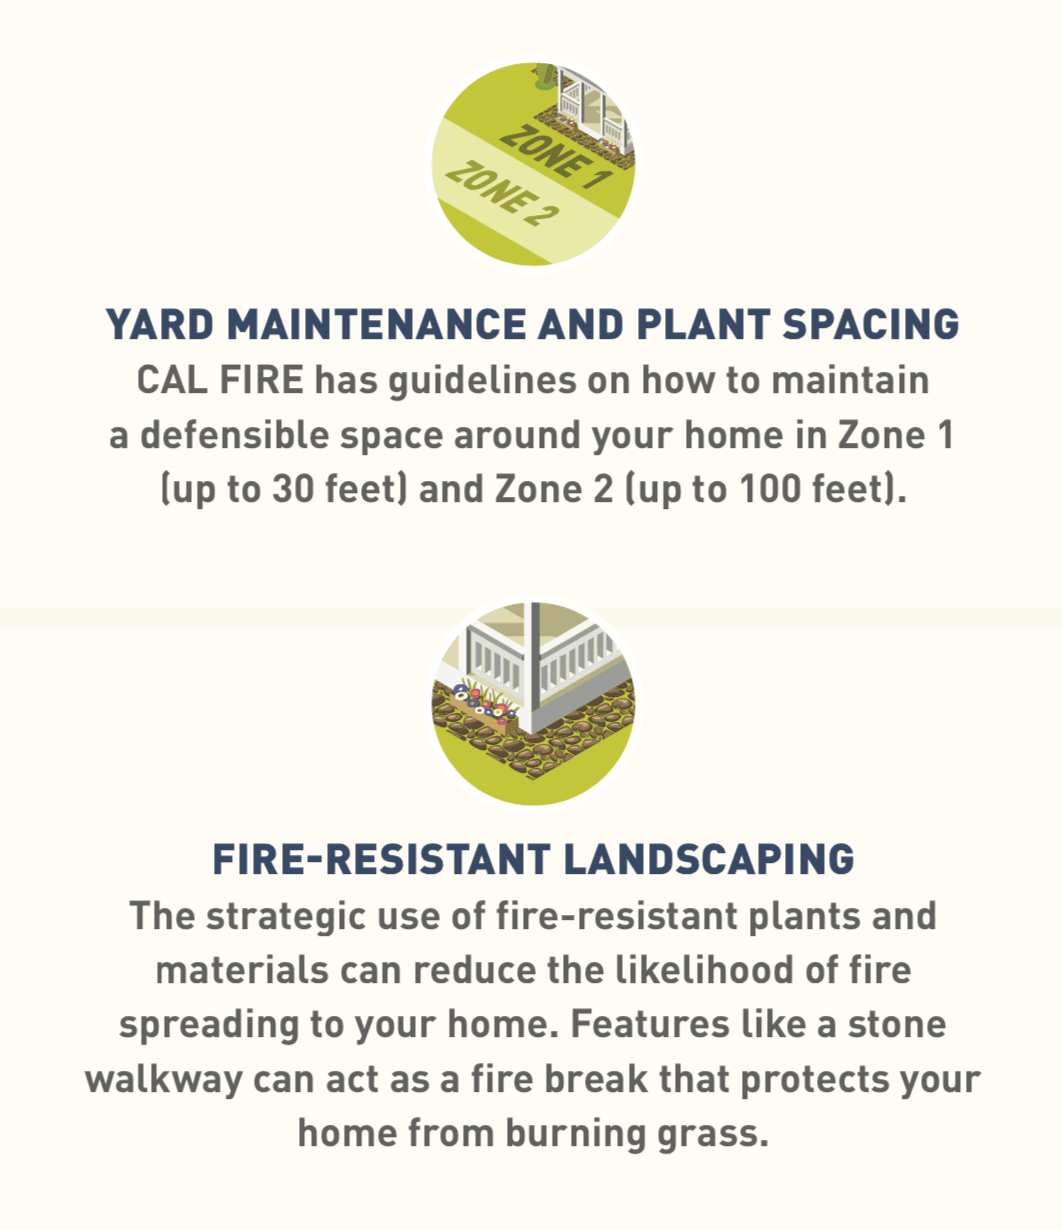 Yard maintenance and plant spacing—CAL FIRE has guidelines on how to maintain a defensible space around your home in Zone 1 (up to 30 feet) and Zone 2 (up to 100 feet).     Fire-resistant landscaping—The strategic use of fire-resistant plants and materials can reduce the likelihood of fire spreading to your home. Features like a stone walkway can act as a fire break that protects your home from burning grass.